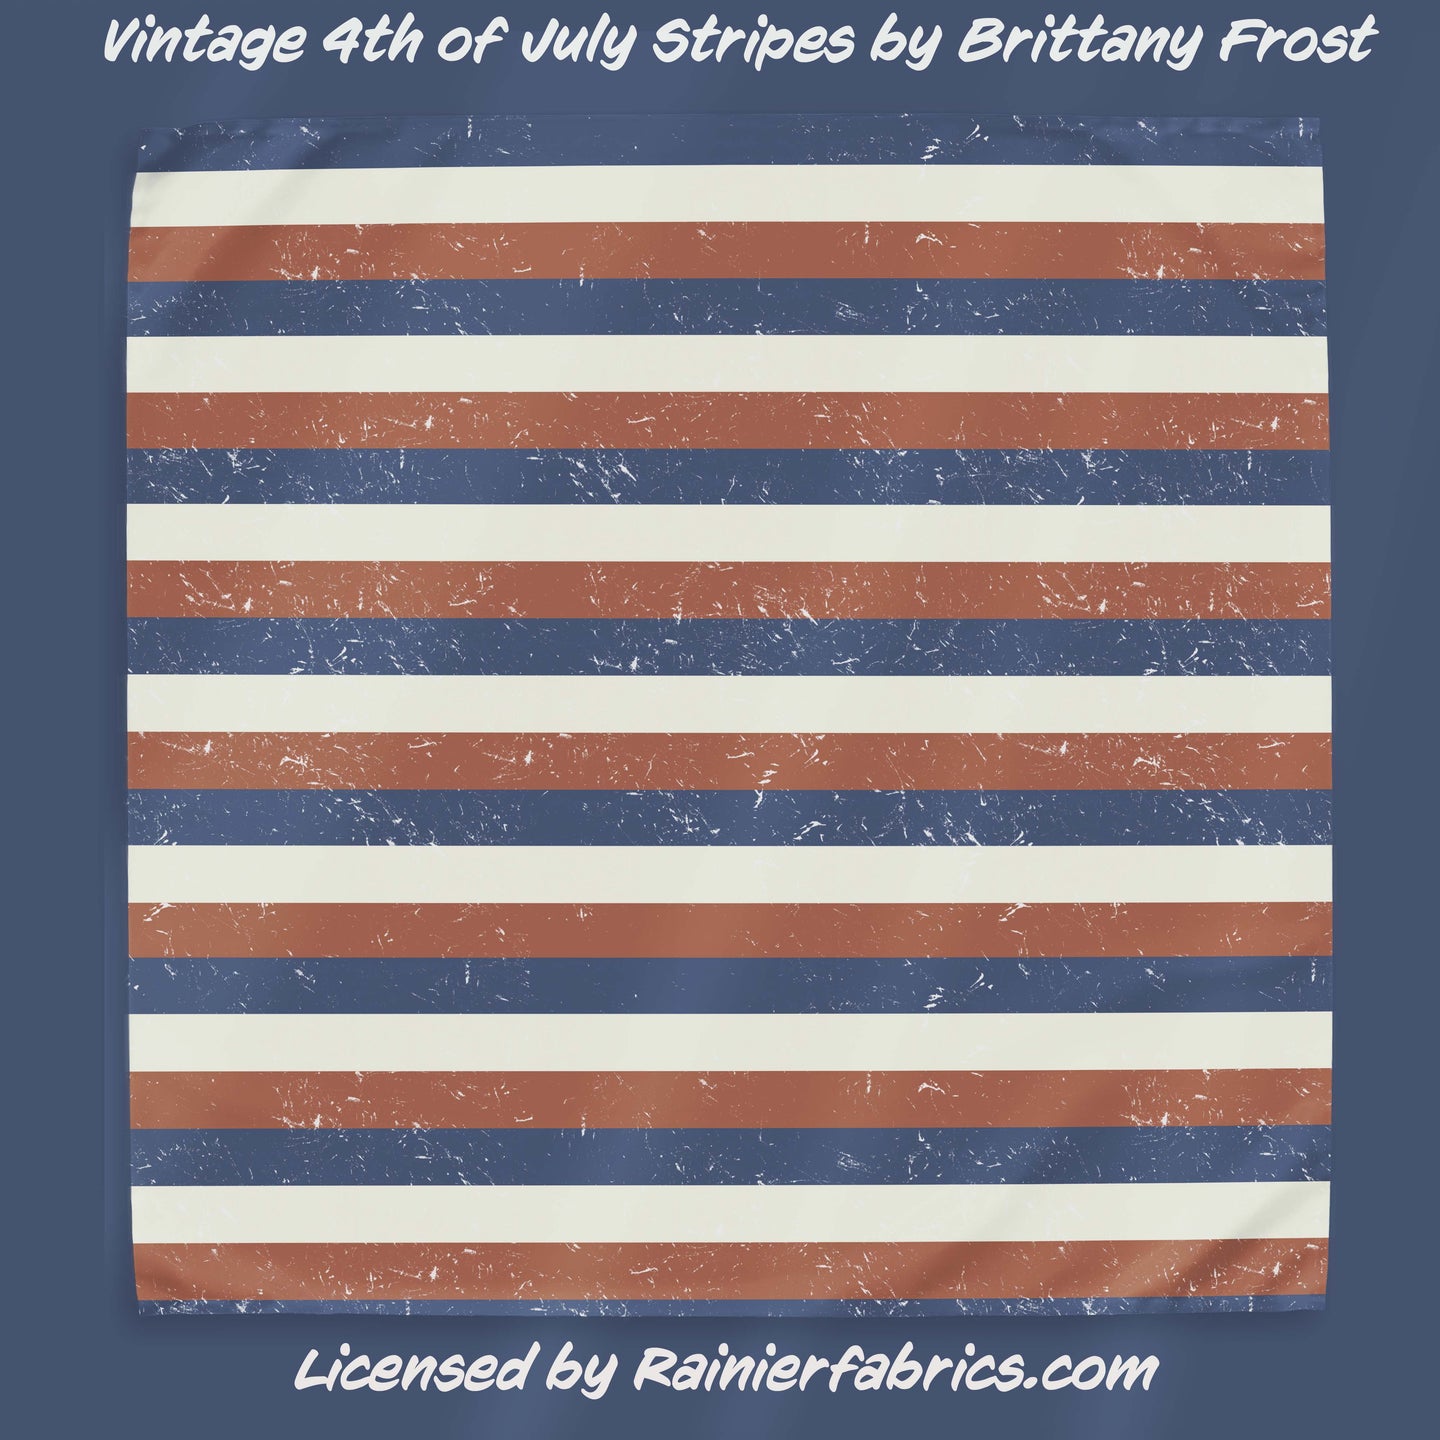 Vintage 4th of July Stripes by Brittany Frost - 2-5 day TAT - Order by 1/2 yard; Blankets and towels available too